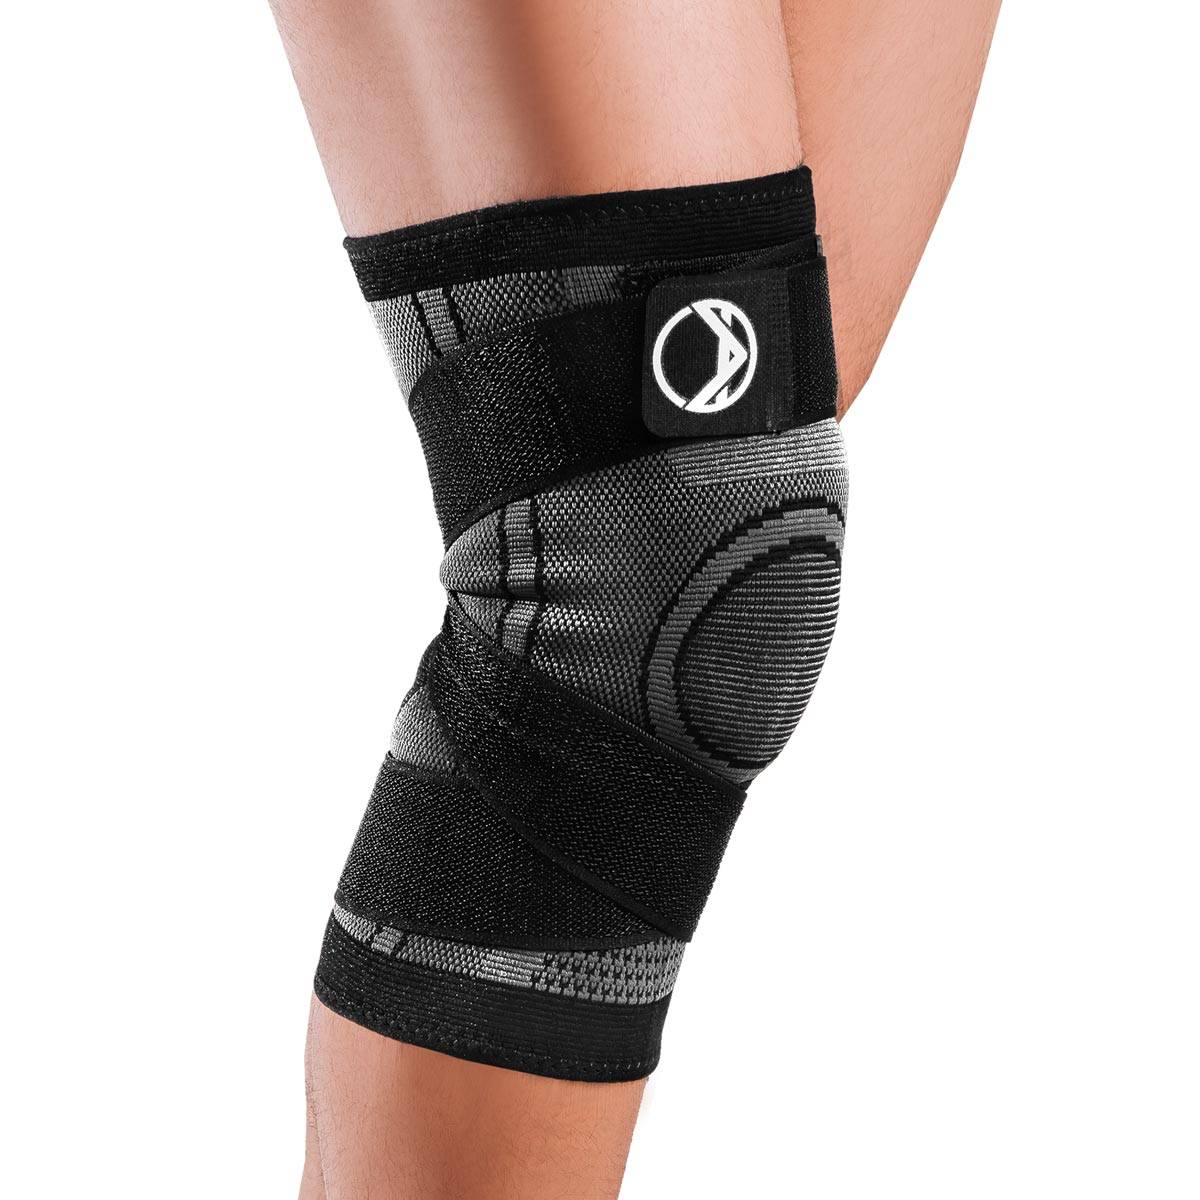 Black knee compression sleeve for men and women